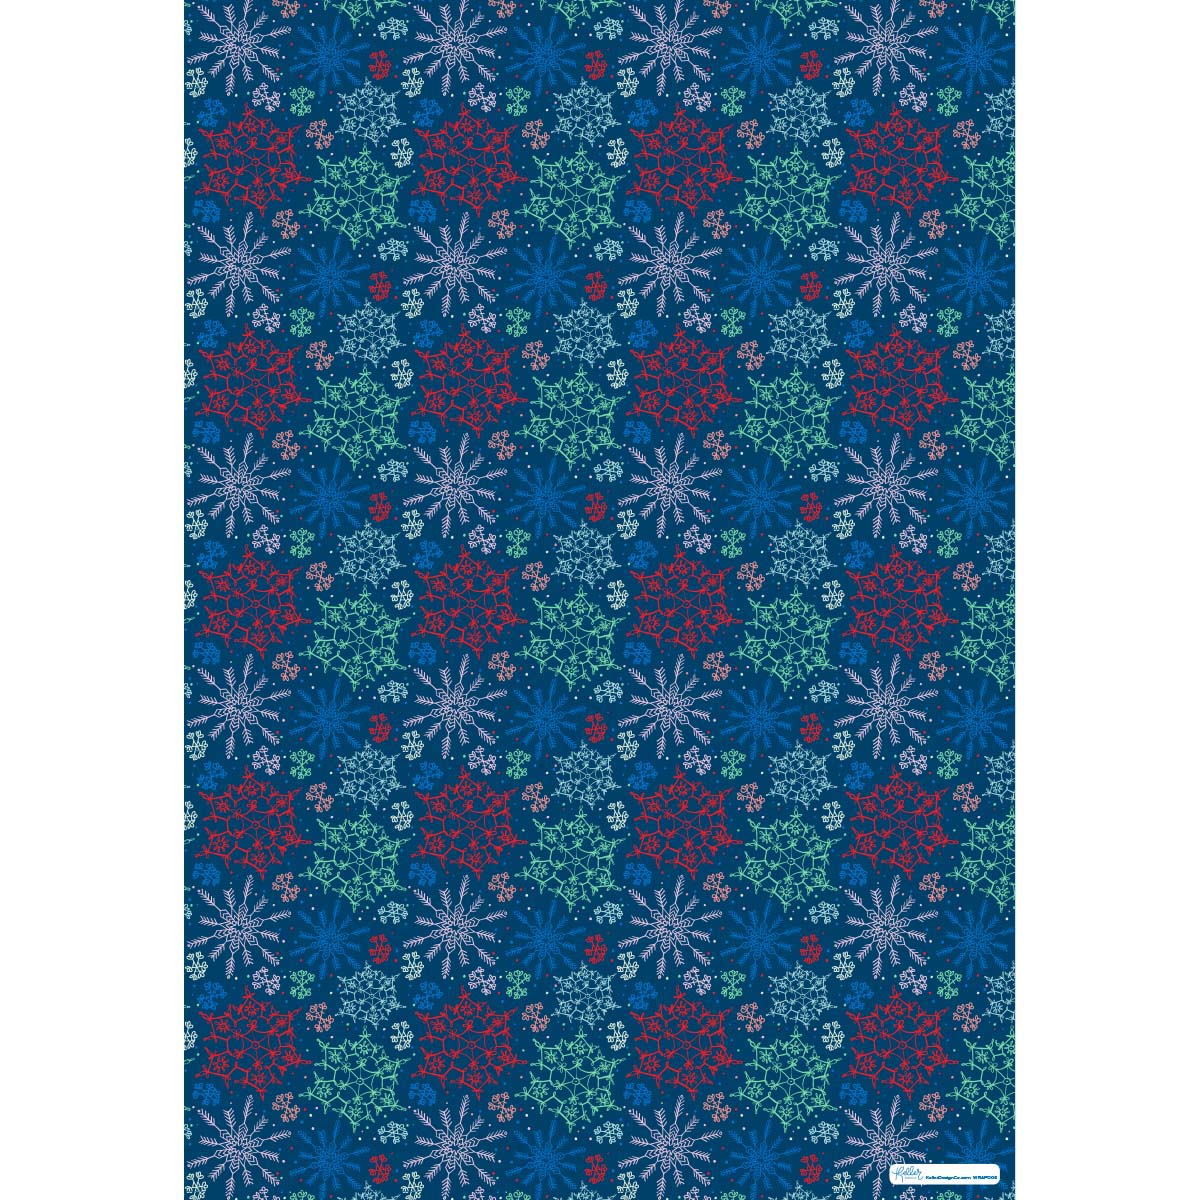 Let it Snow-Navy Gift Wrap-3 Sheets-Wholesale